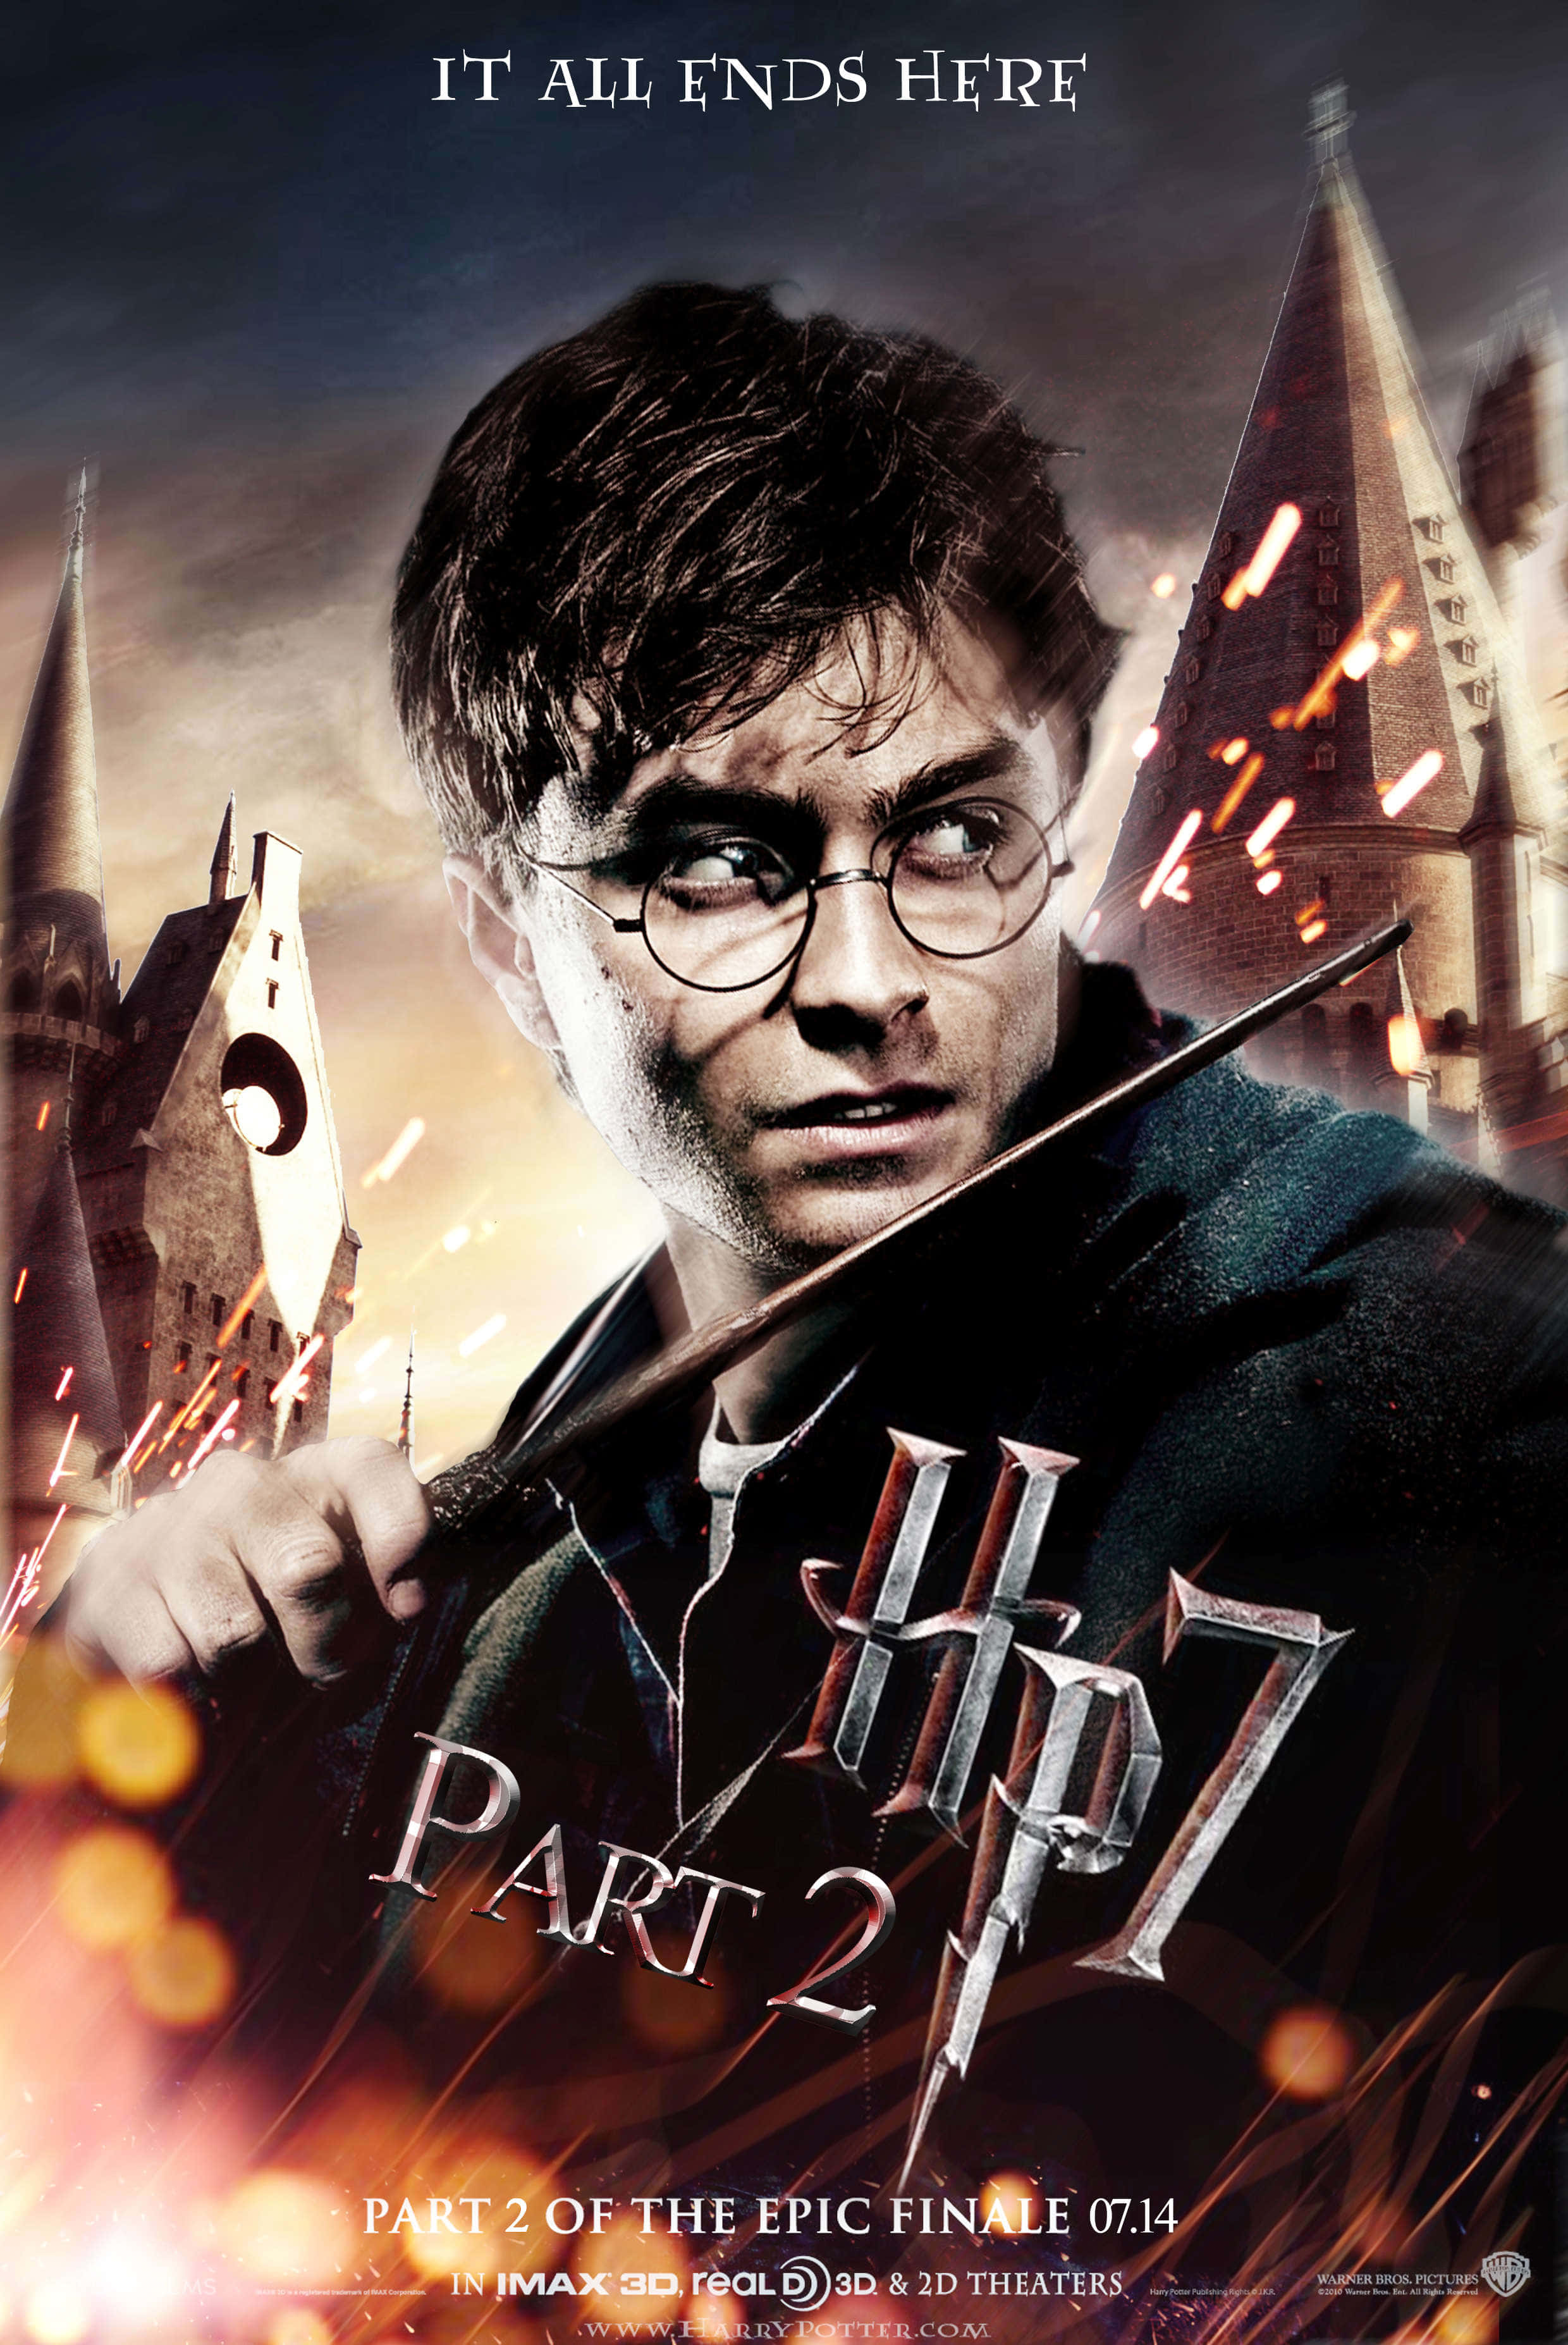 "Harry Potter and the Deathly Hallows" Wallpaper